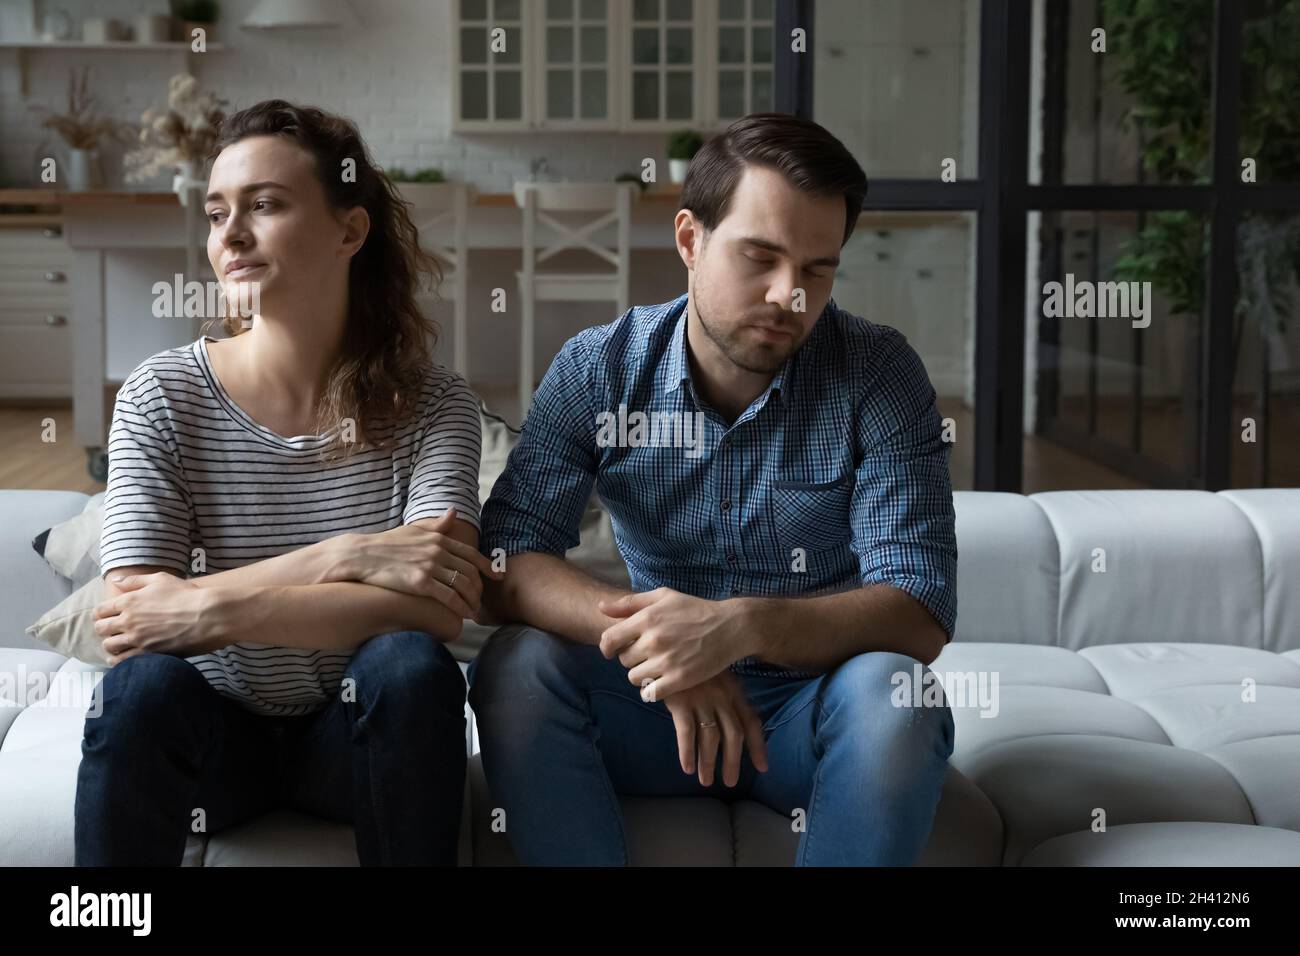 Depressed unhappy young couple sitting on sofa. Stock Photo